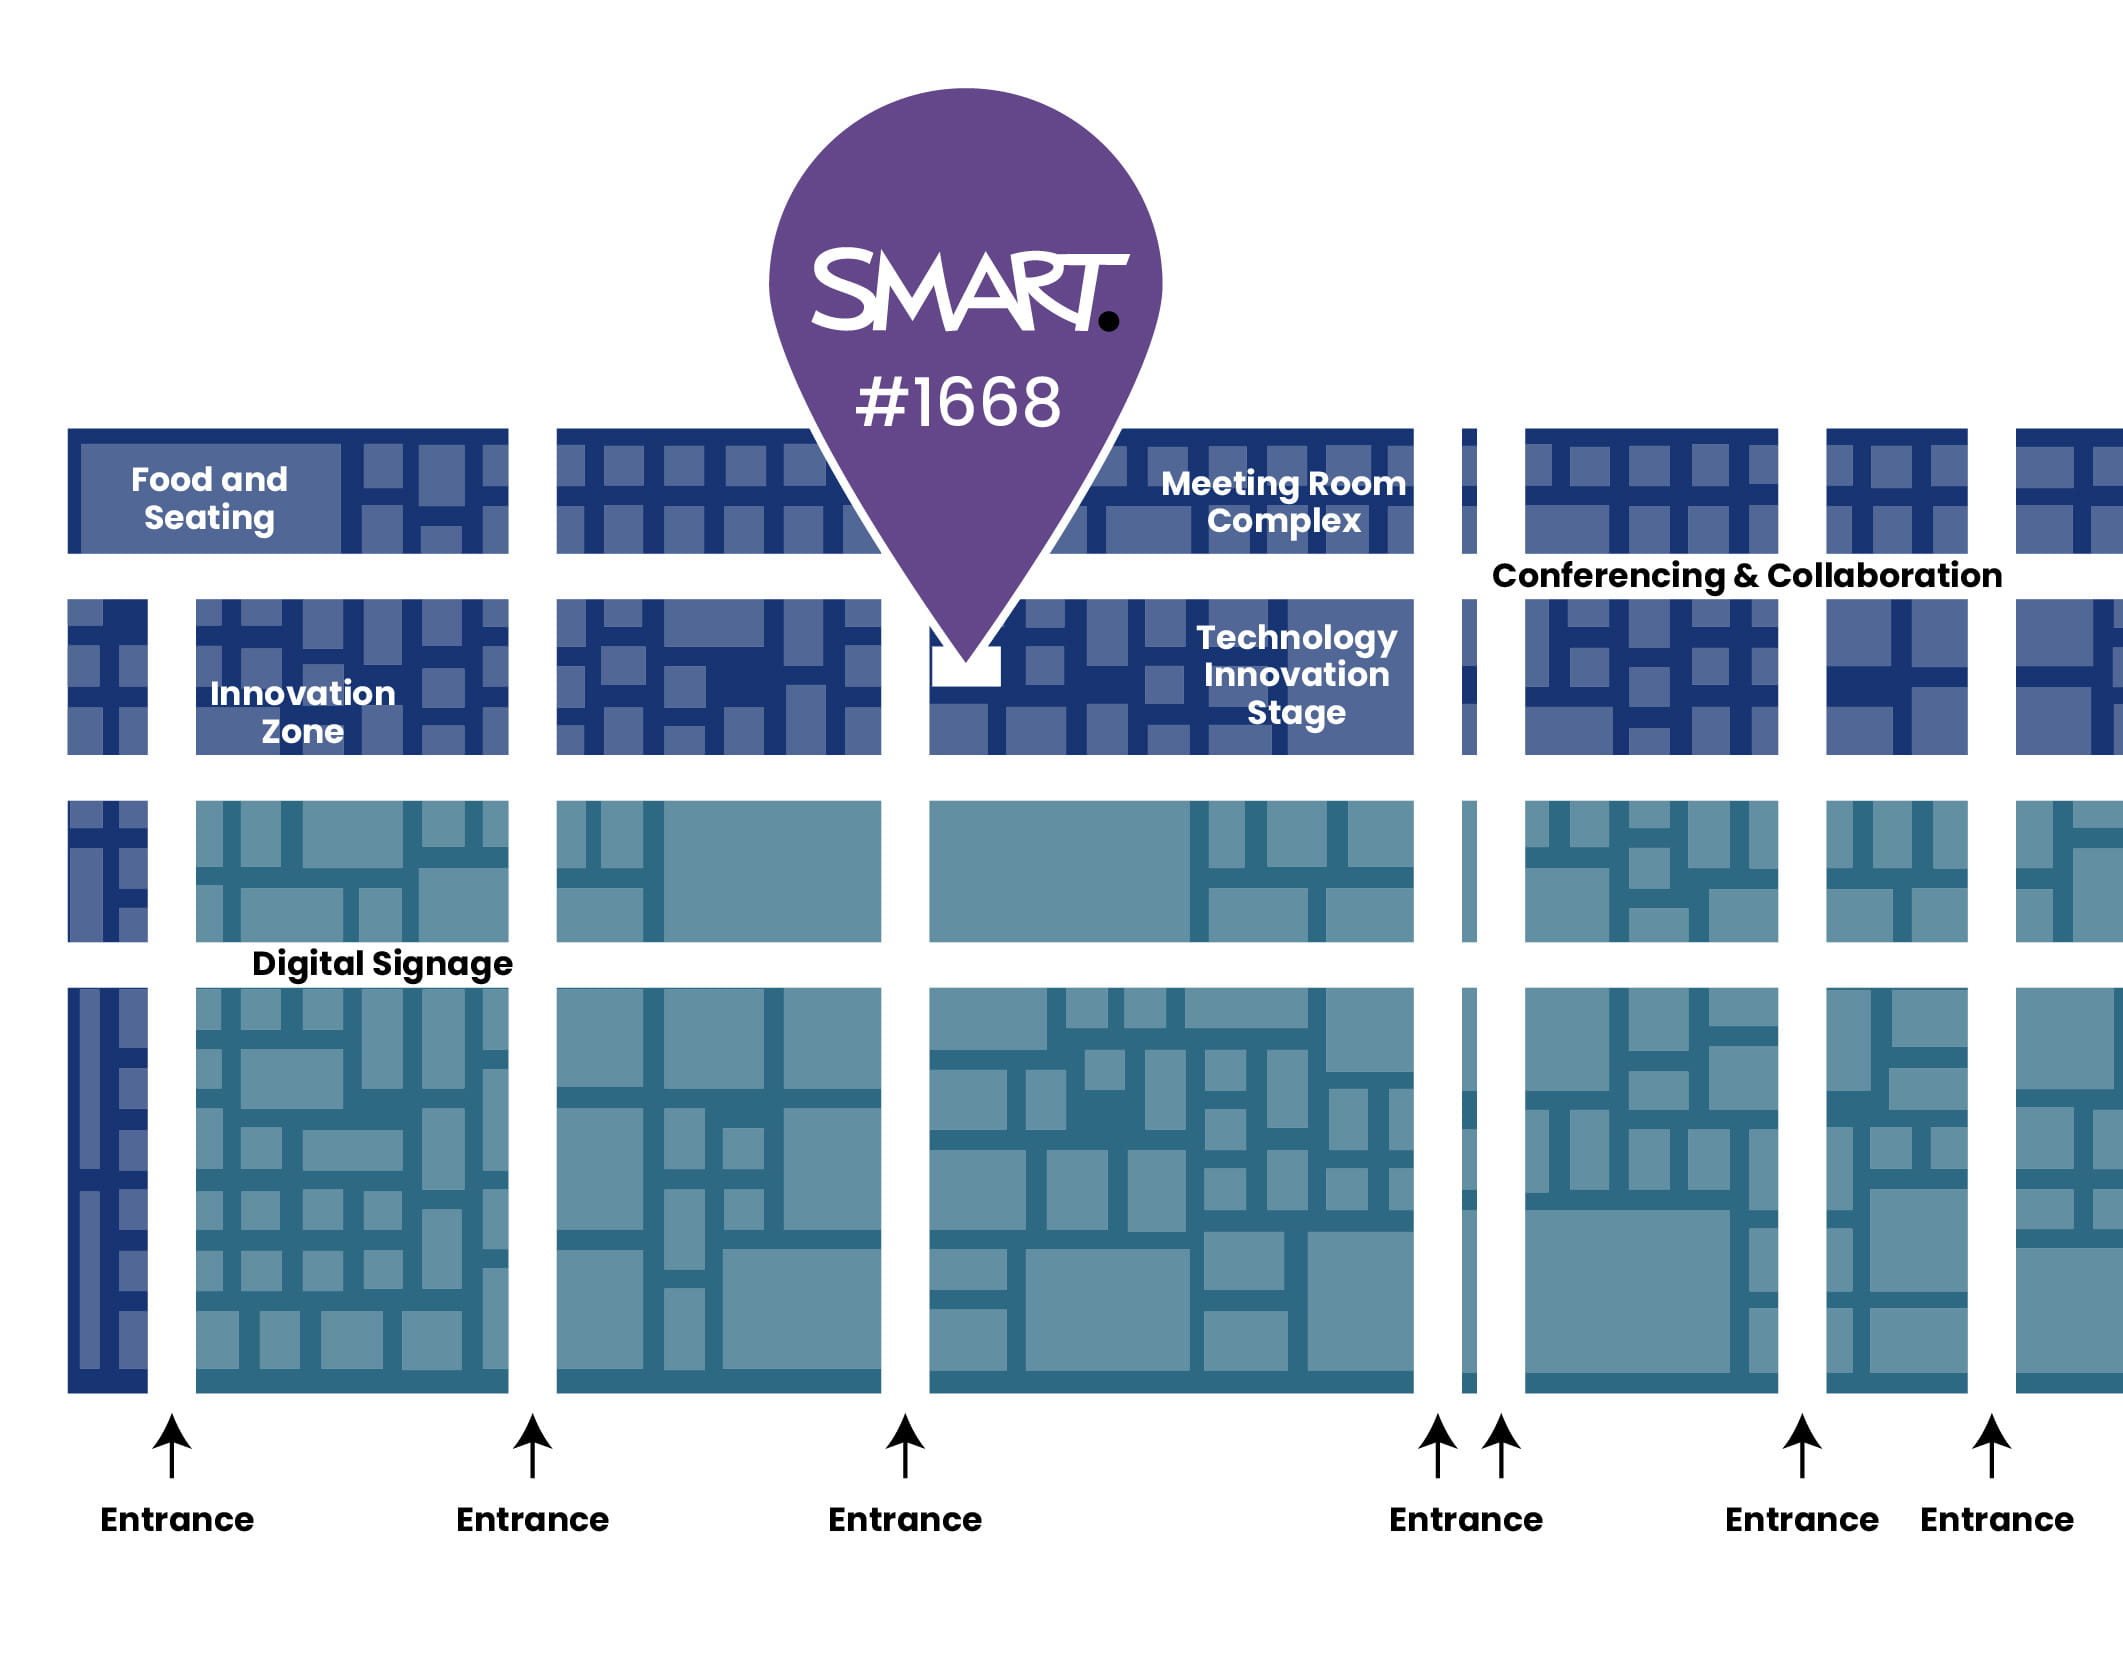 Map of Infocomm 2023 event with highlighted location of the SMART booth at #1668.